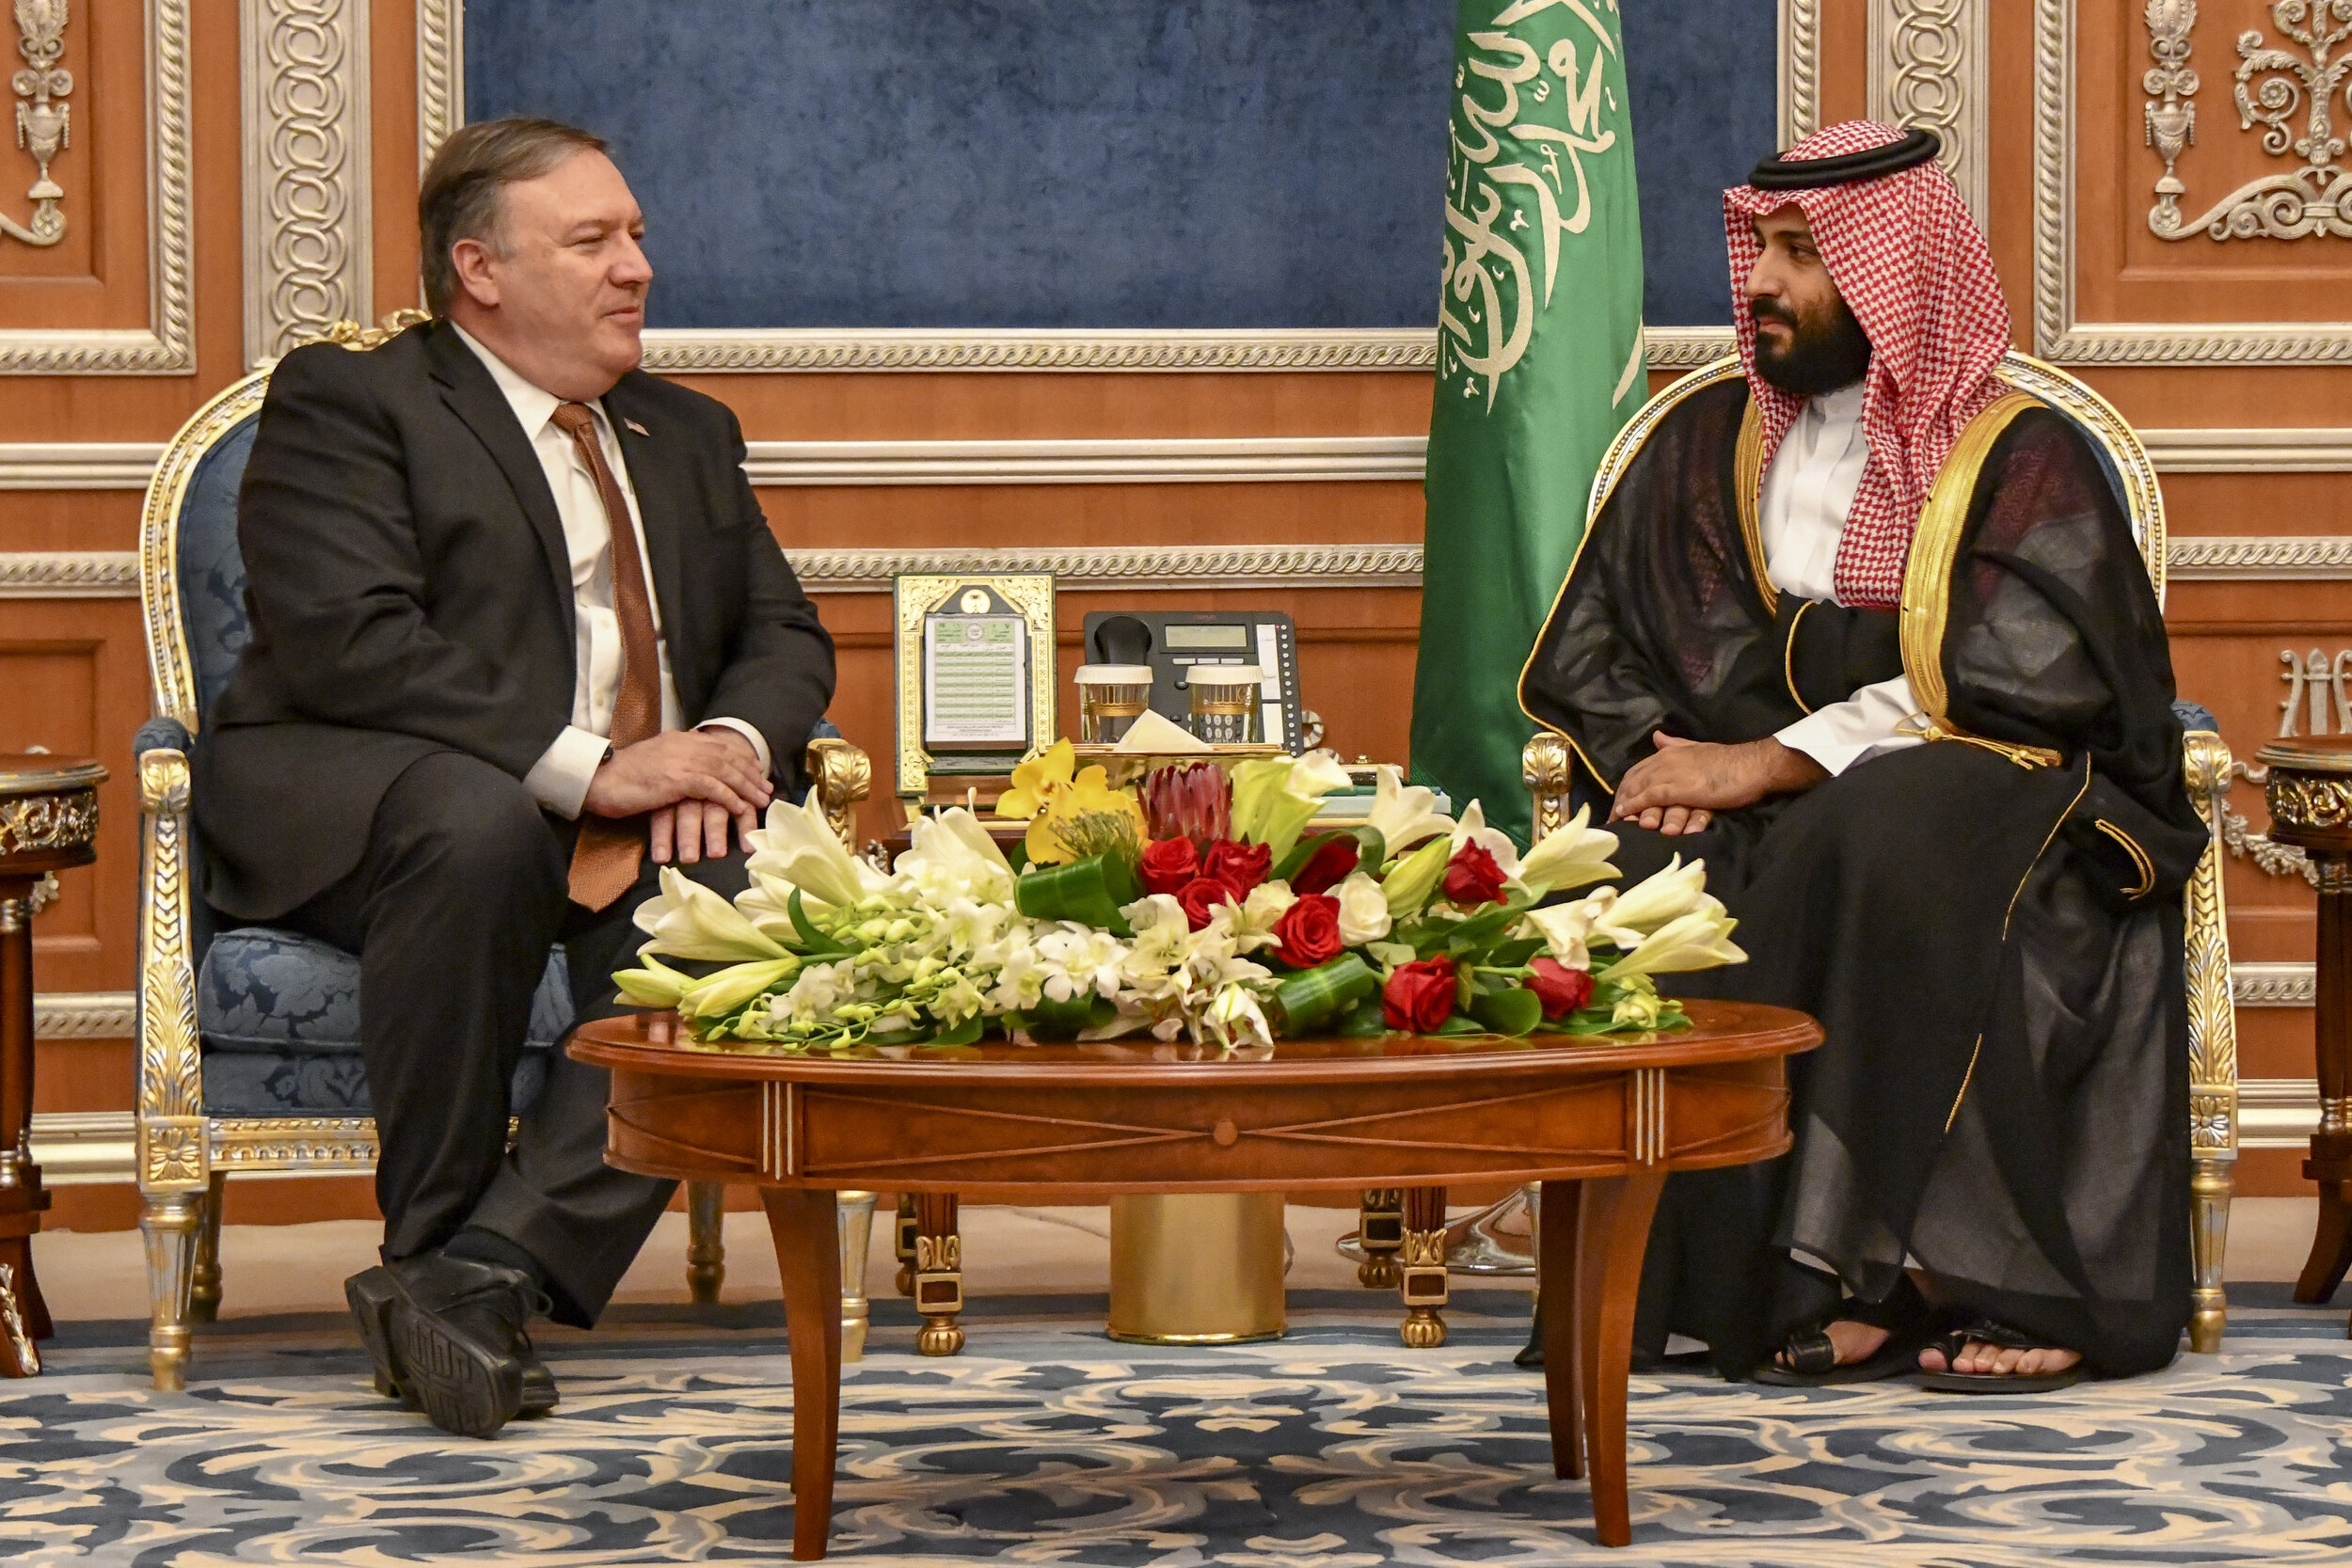 PICTURED: Secretary of State Mike Pompeo sits down with Saudi Crown Prince Mohammed bin Salman.